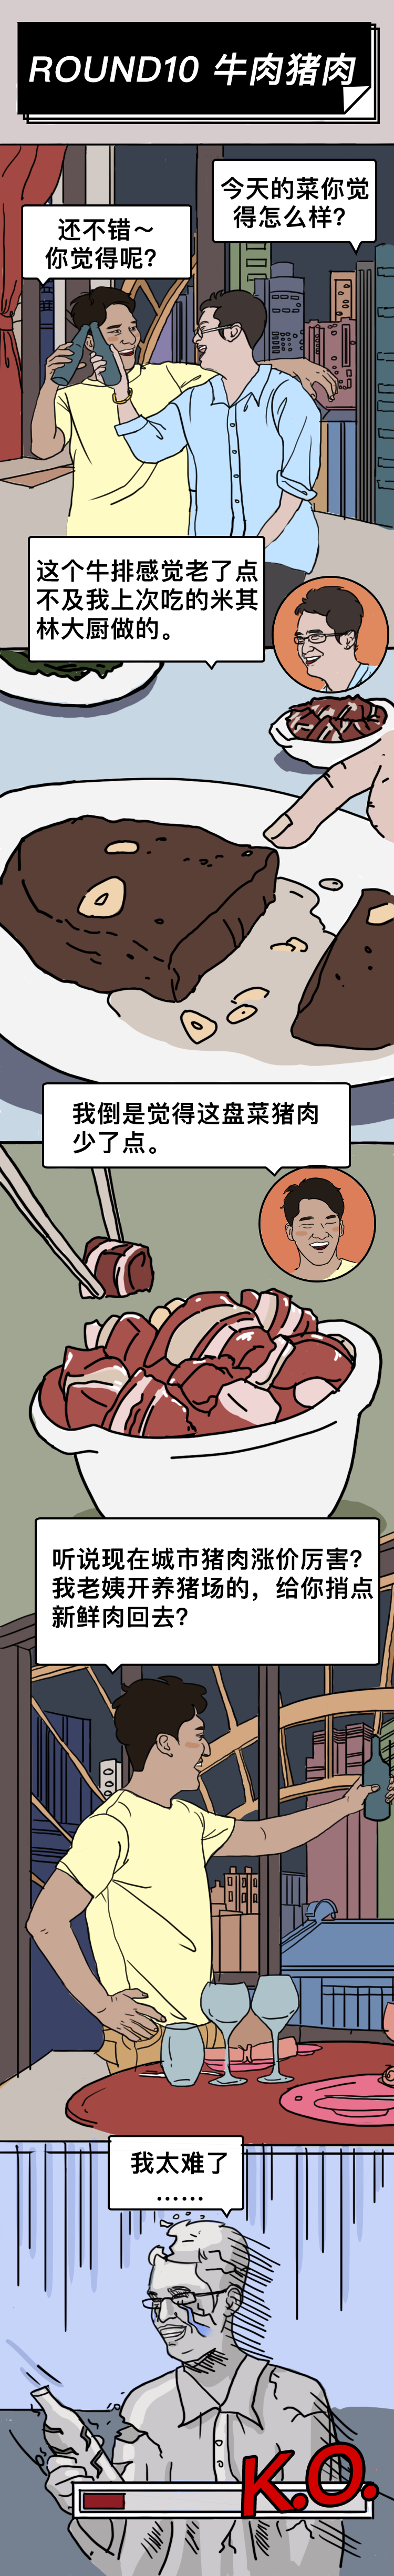 Round10牛肉猪肉.png